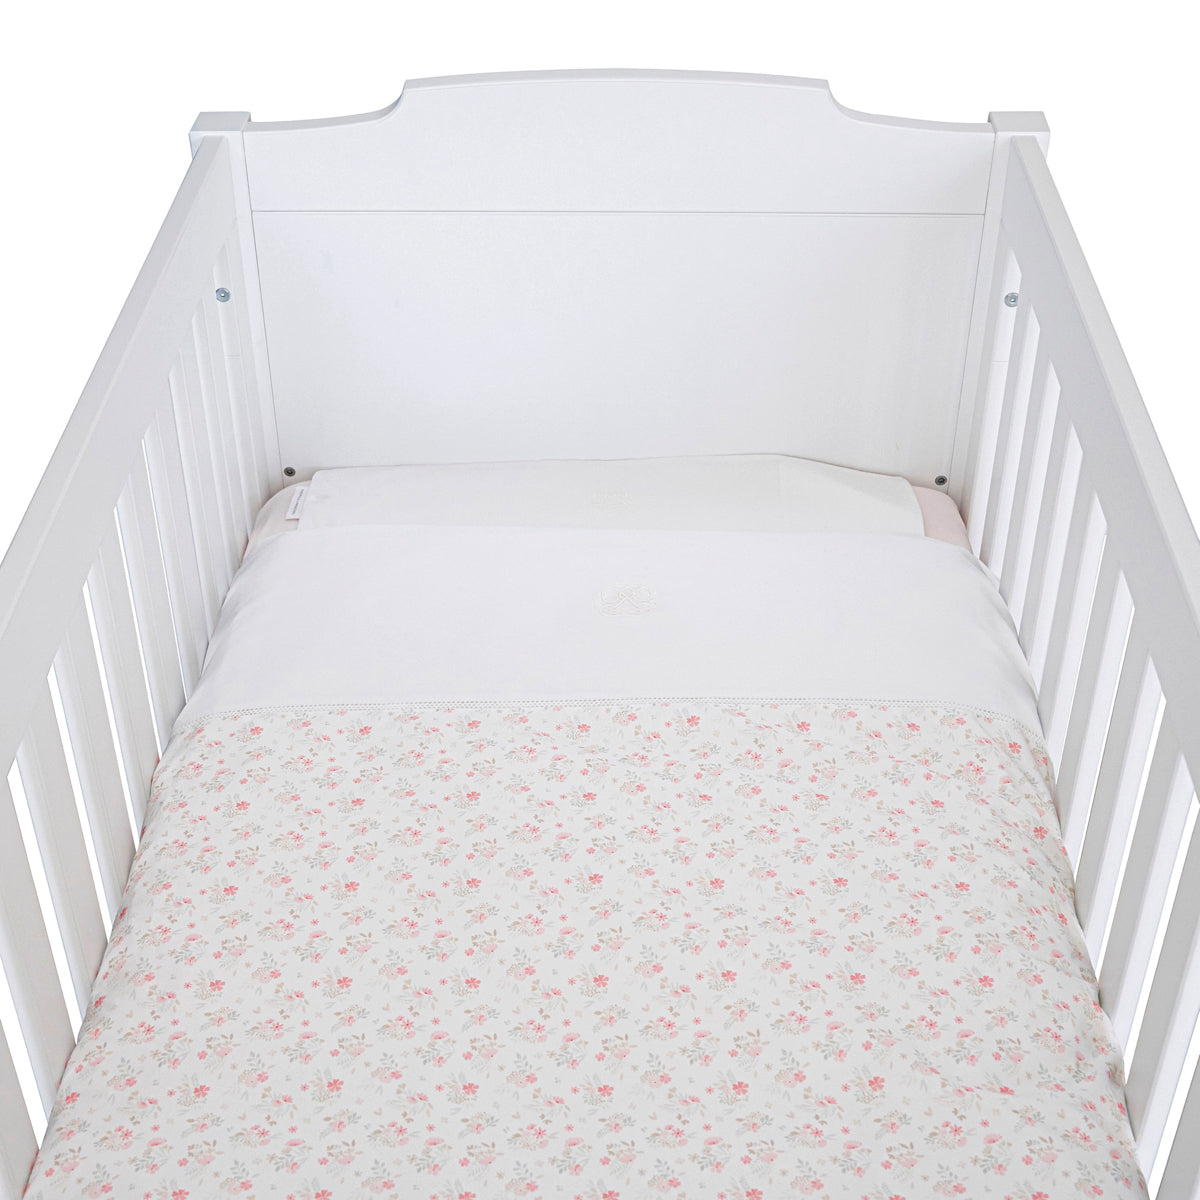 Theophile & Patachou Baby Cot Bed Duvet Cover and Pillowcase - Pink Flower